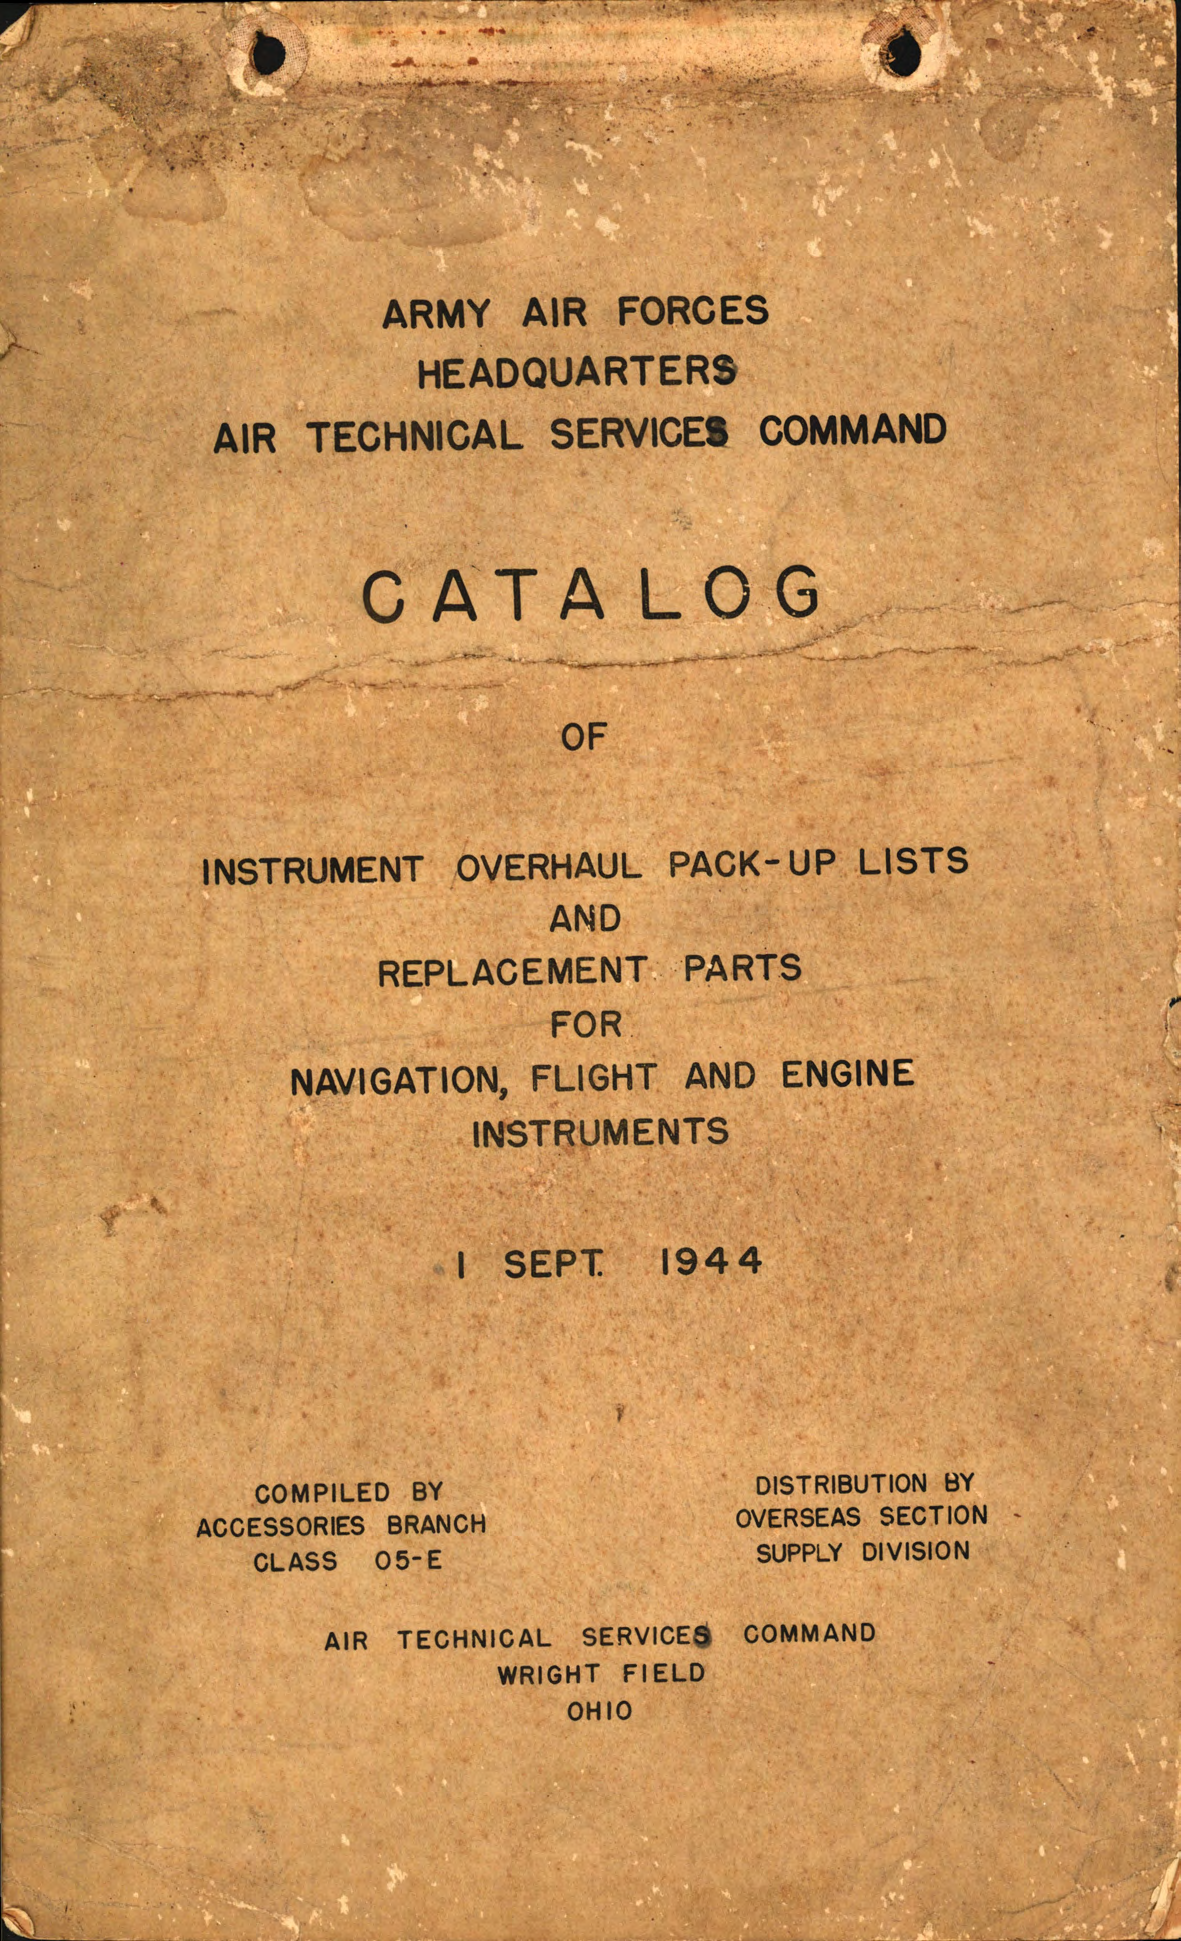 Sample page 1 from AirCorps Library document: Catalog of Instrument Overhaul Pack-Up Lists and Replacement Parts for Navigation, Flight, and Engine Instruments